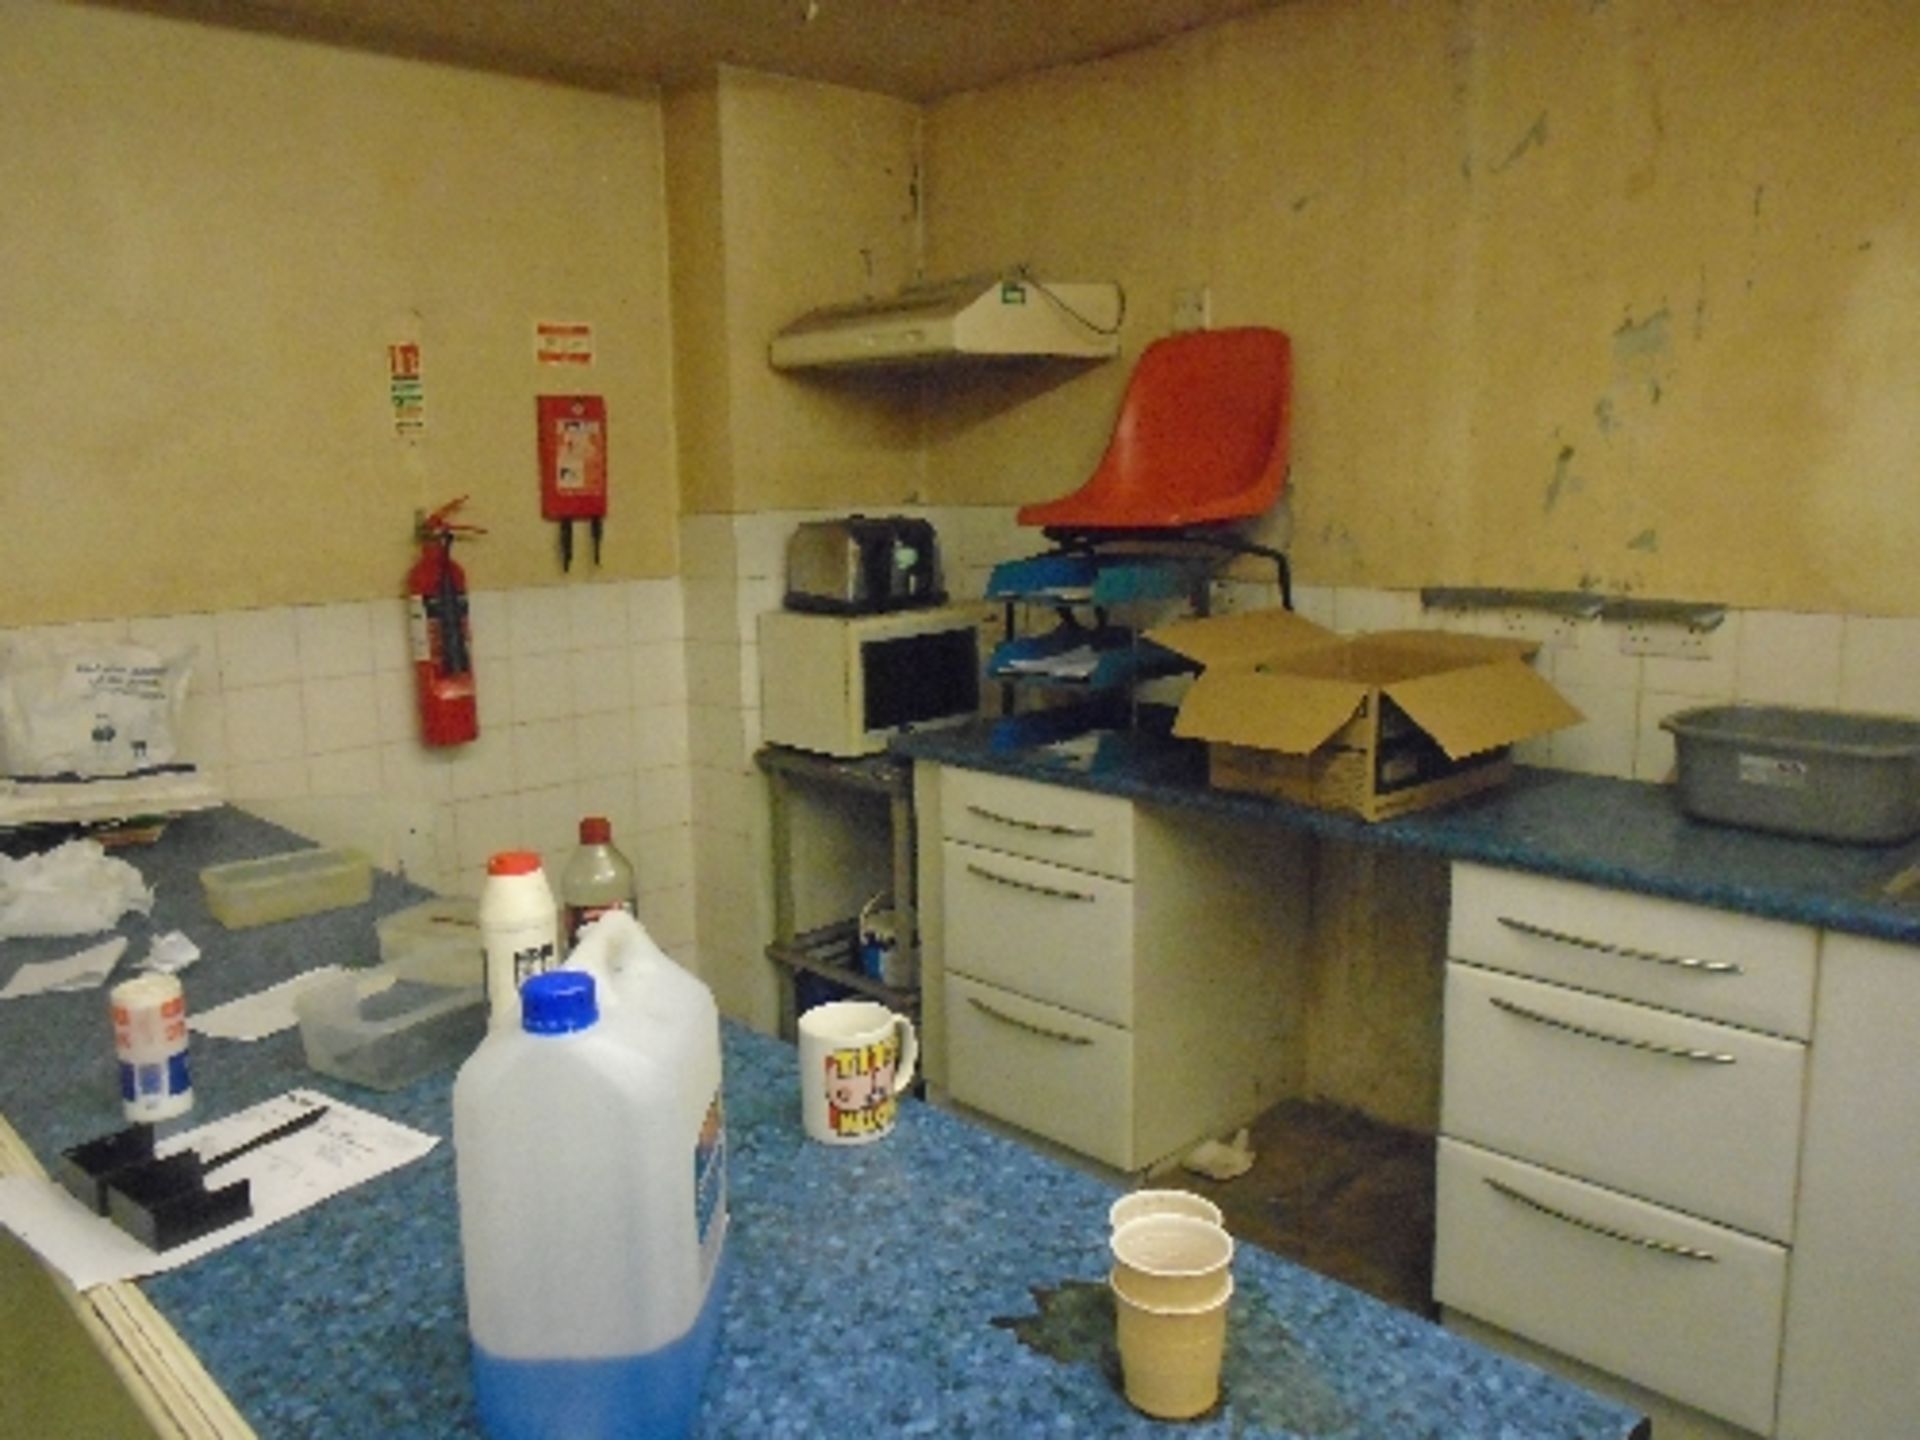 Remaining contents to canteen area - tables, chairs, vacuum cleaners, heaters, mugs, - Image 4 of 4